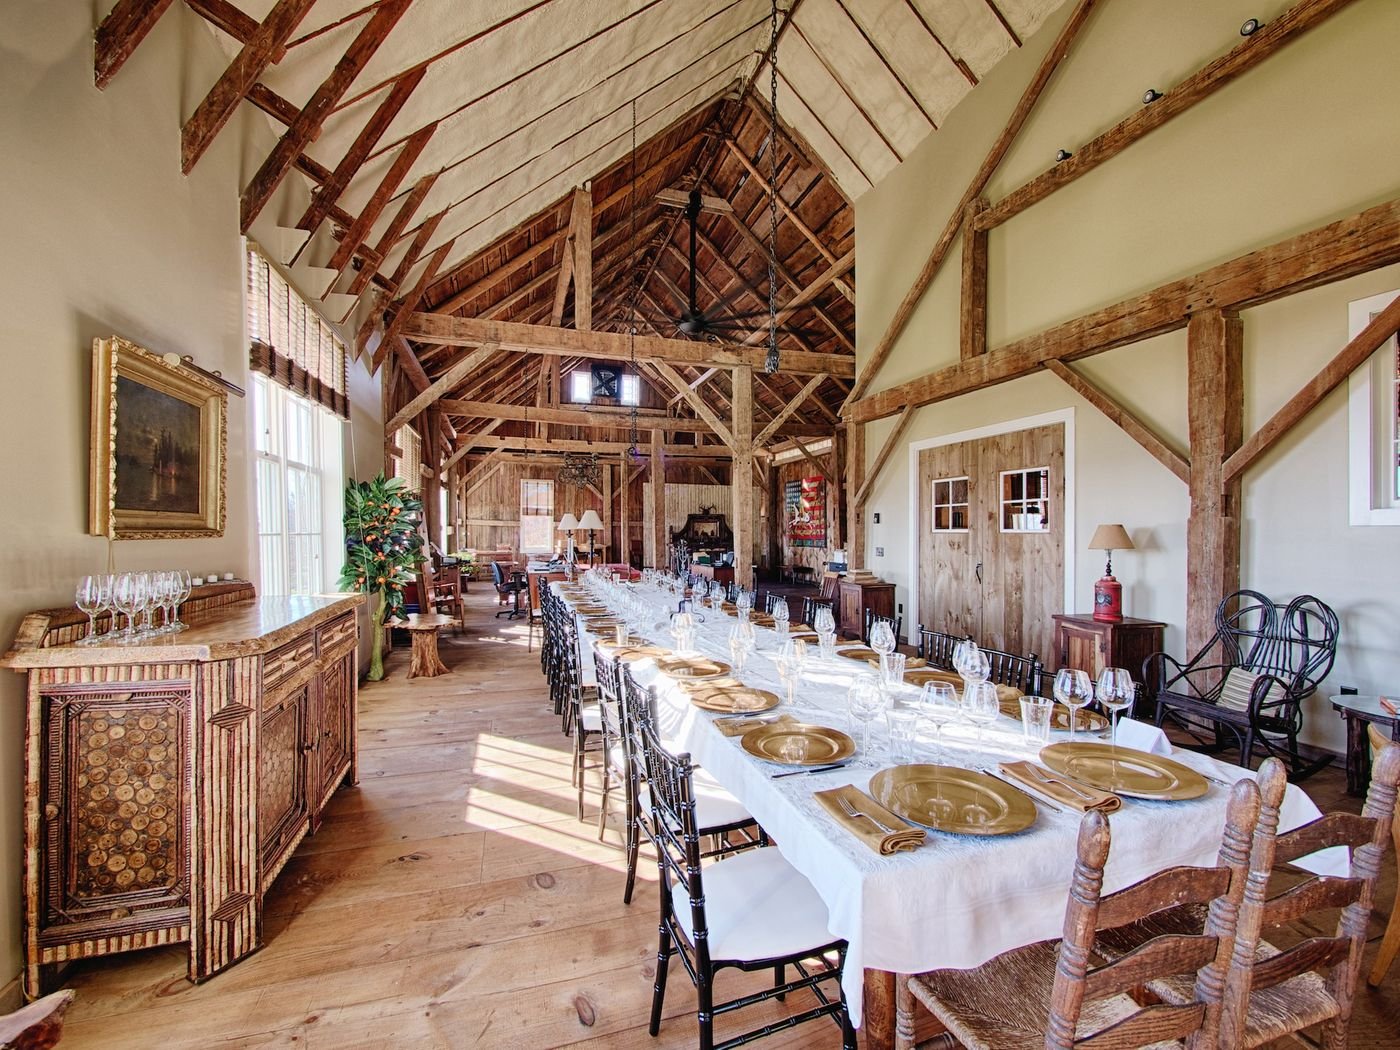 Francis York This New England Estate Comes with a Restored 18th Century Farmhouse and Entertainment Barns 5.jpeg